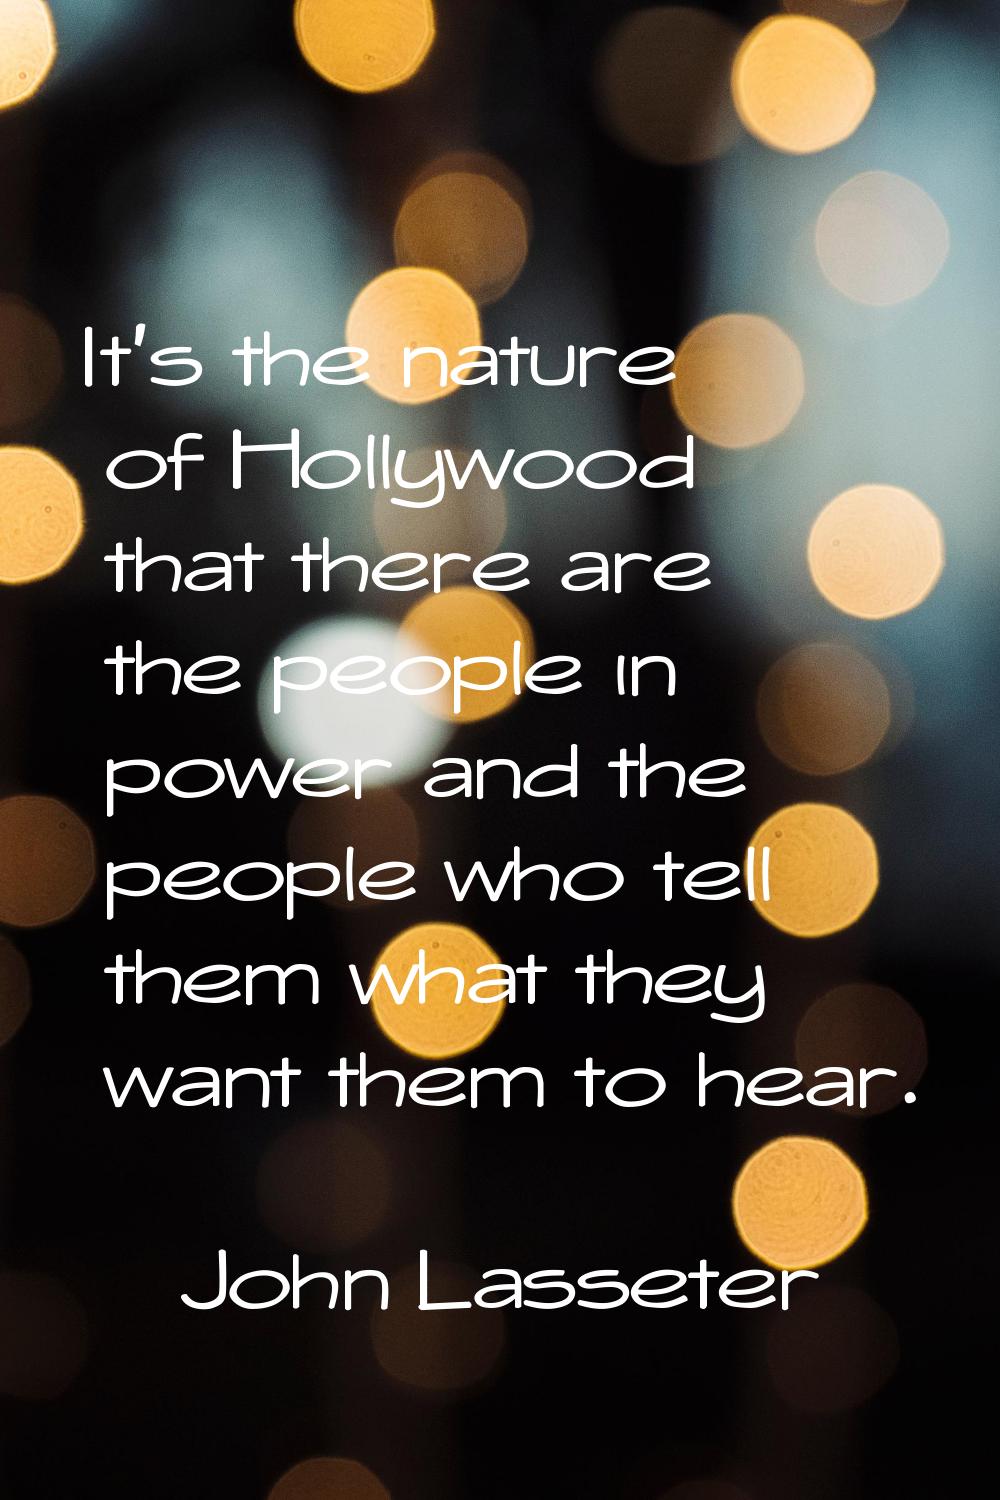 It's the nature of Hollywood that there are the people in power and the people who tell them what t